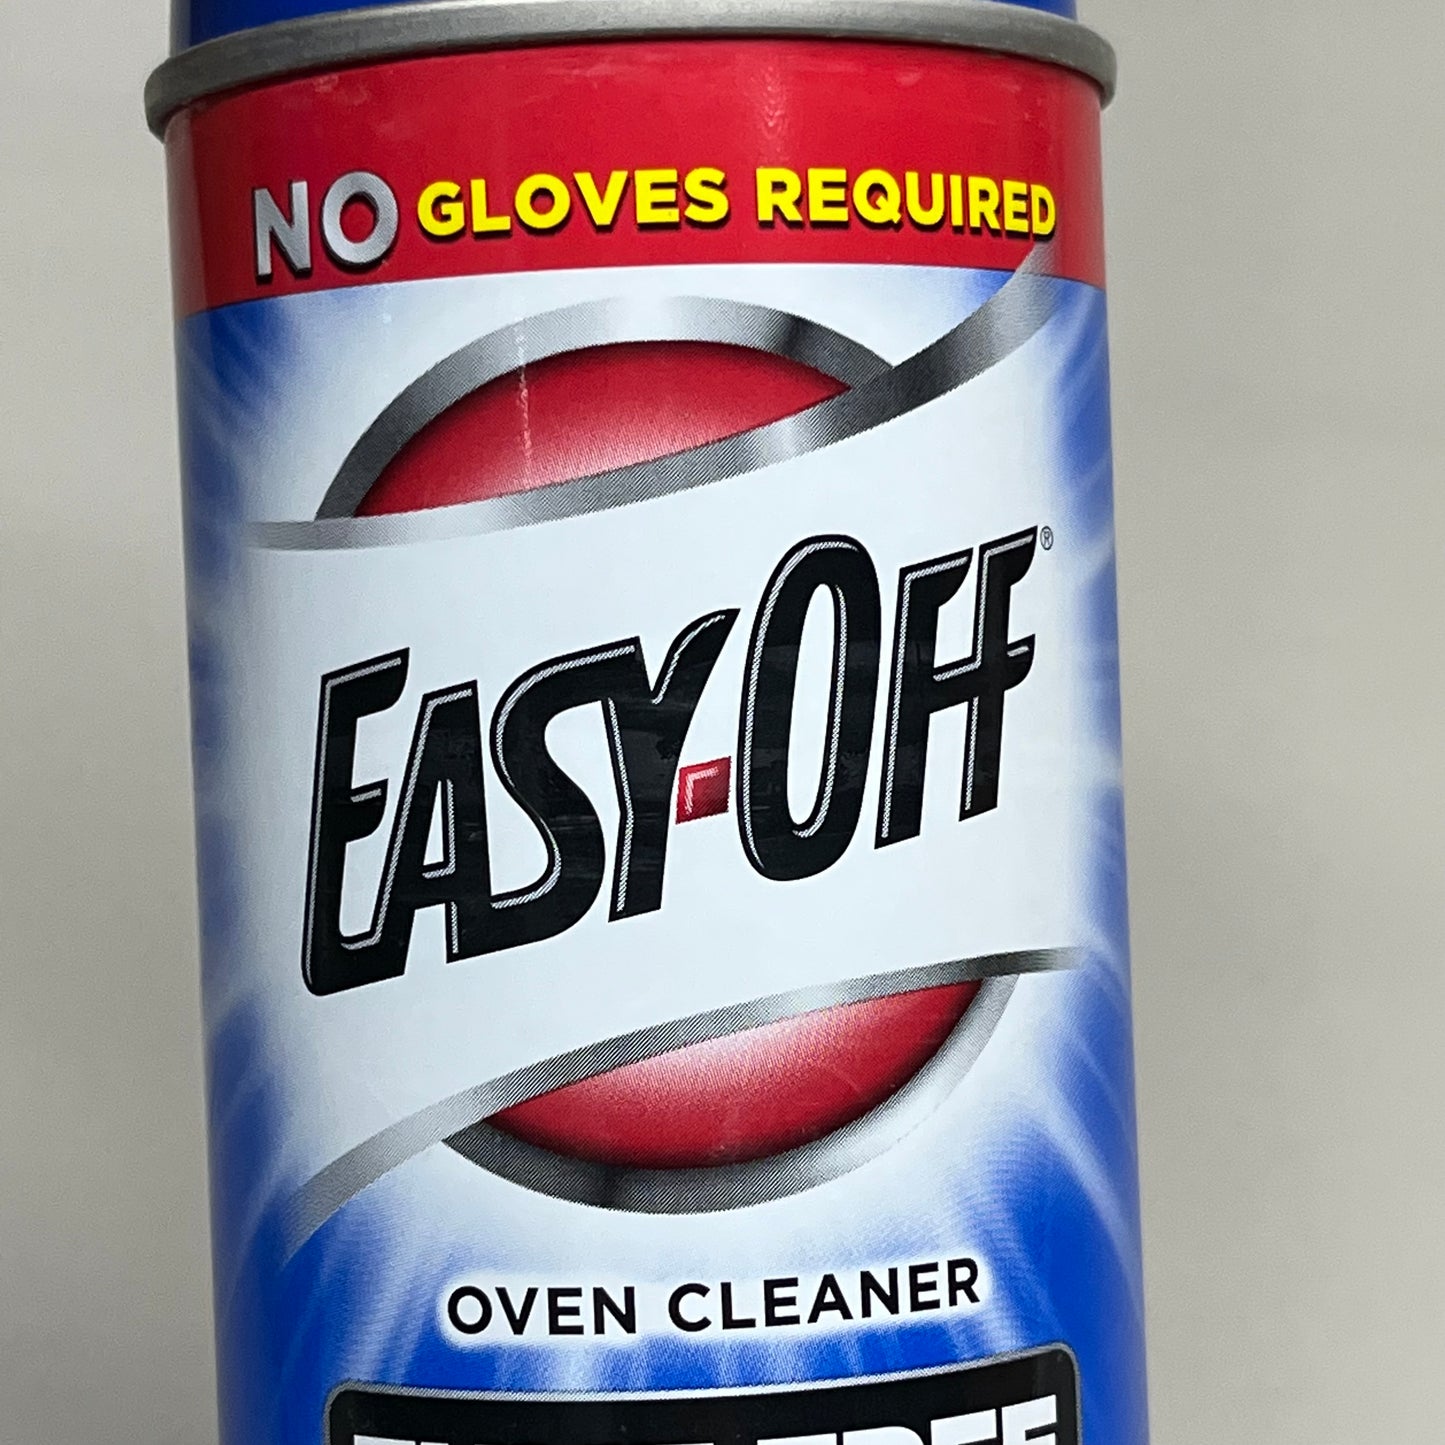 EASY-OFF 2-PACK! Oven Cleaner Lemon Scented Fume Free (New)